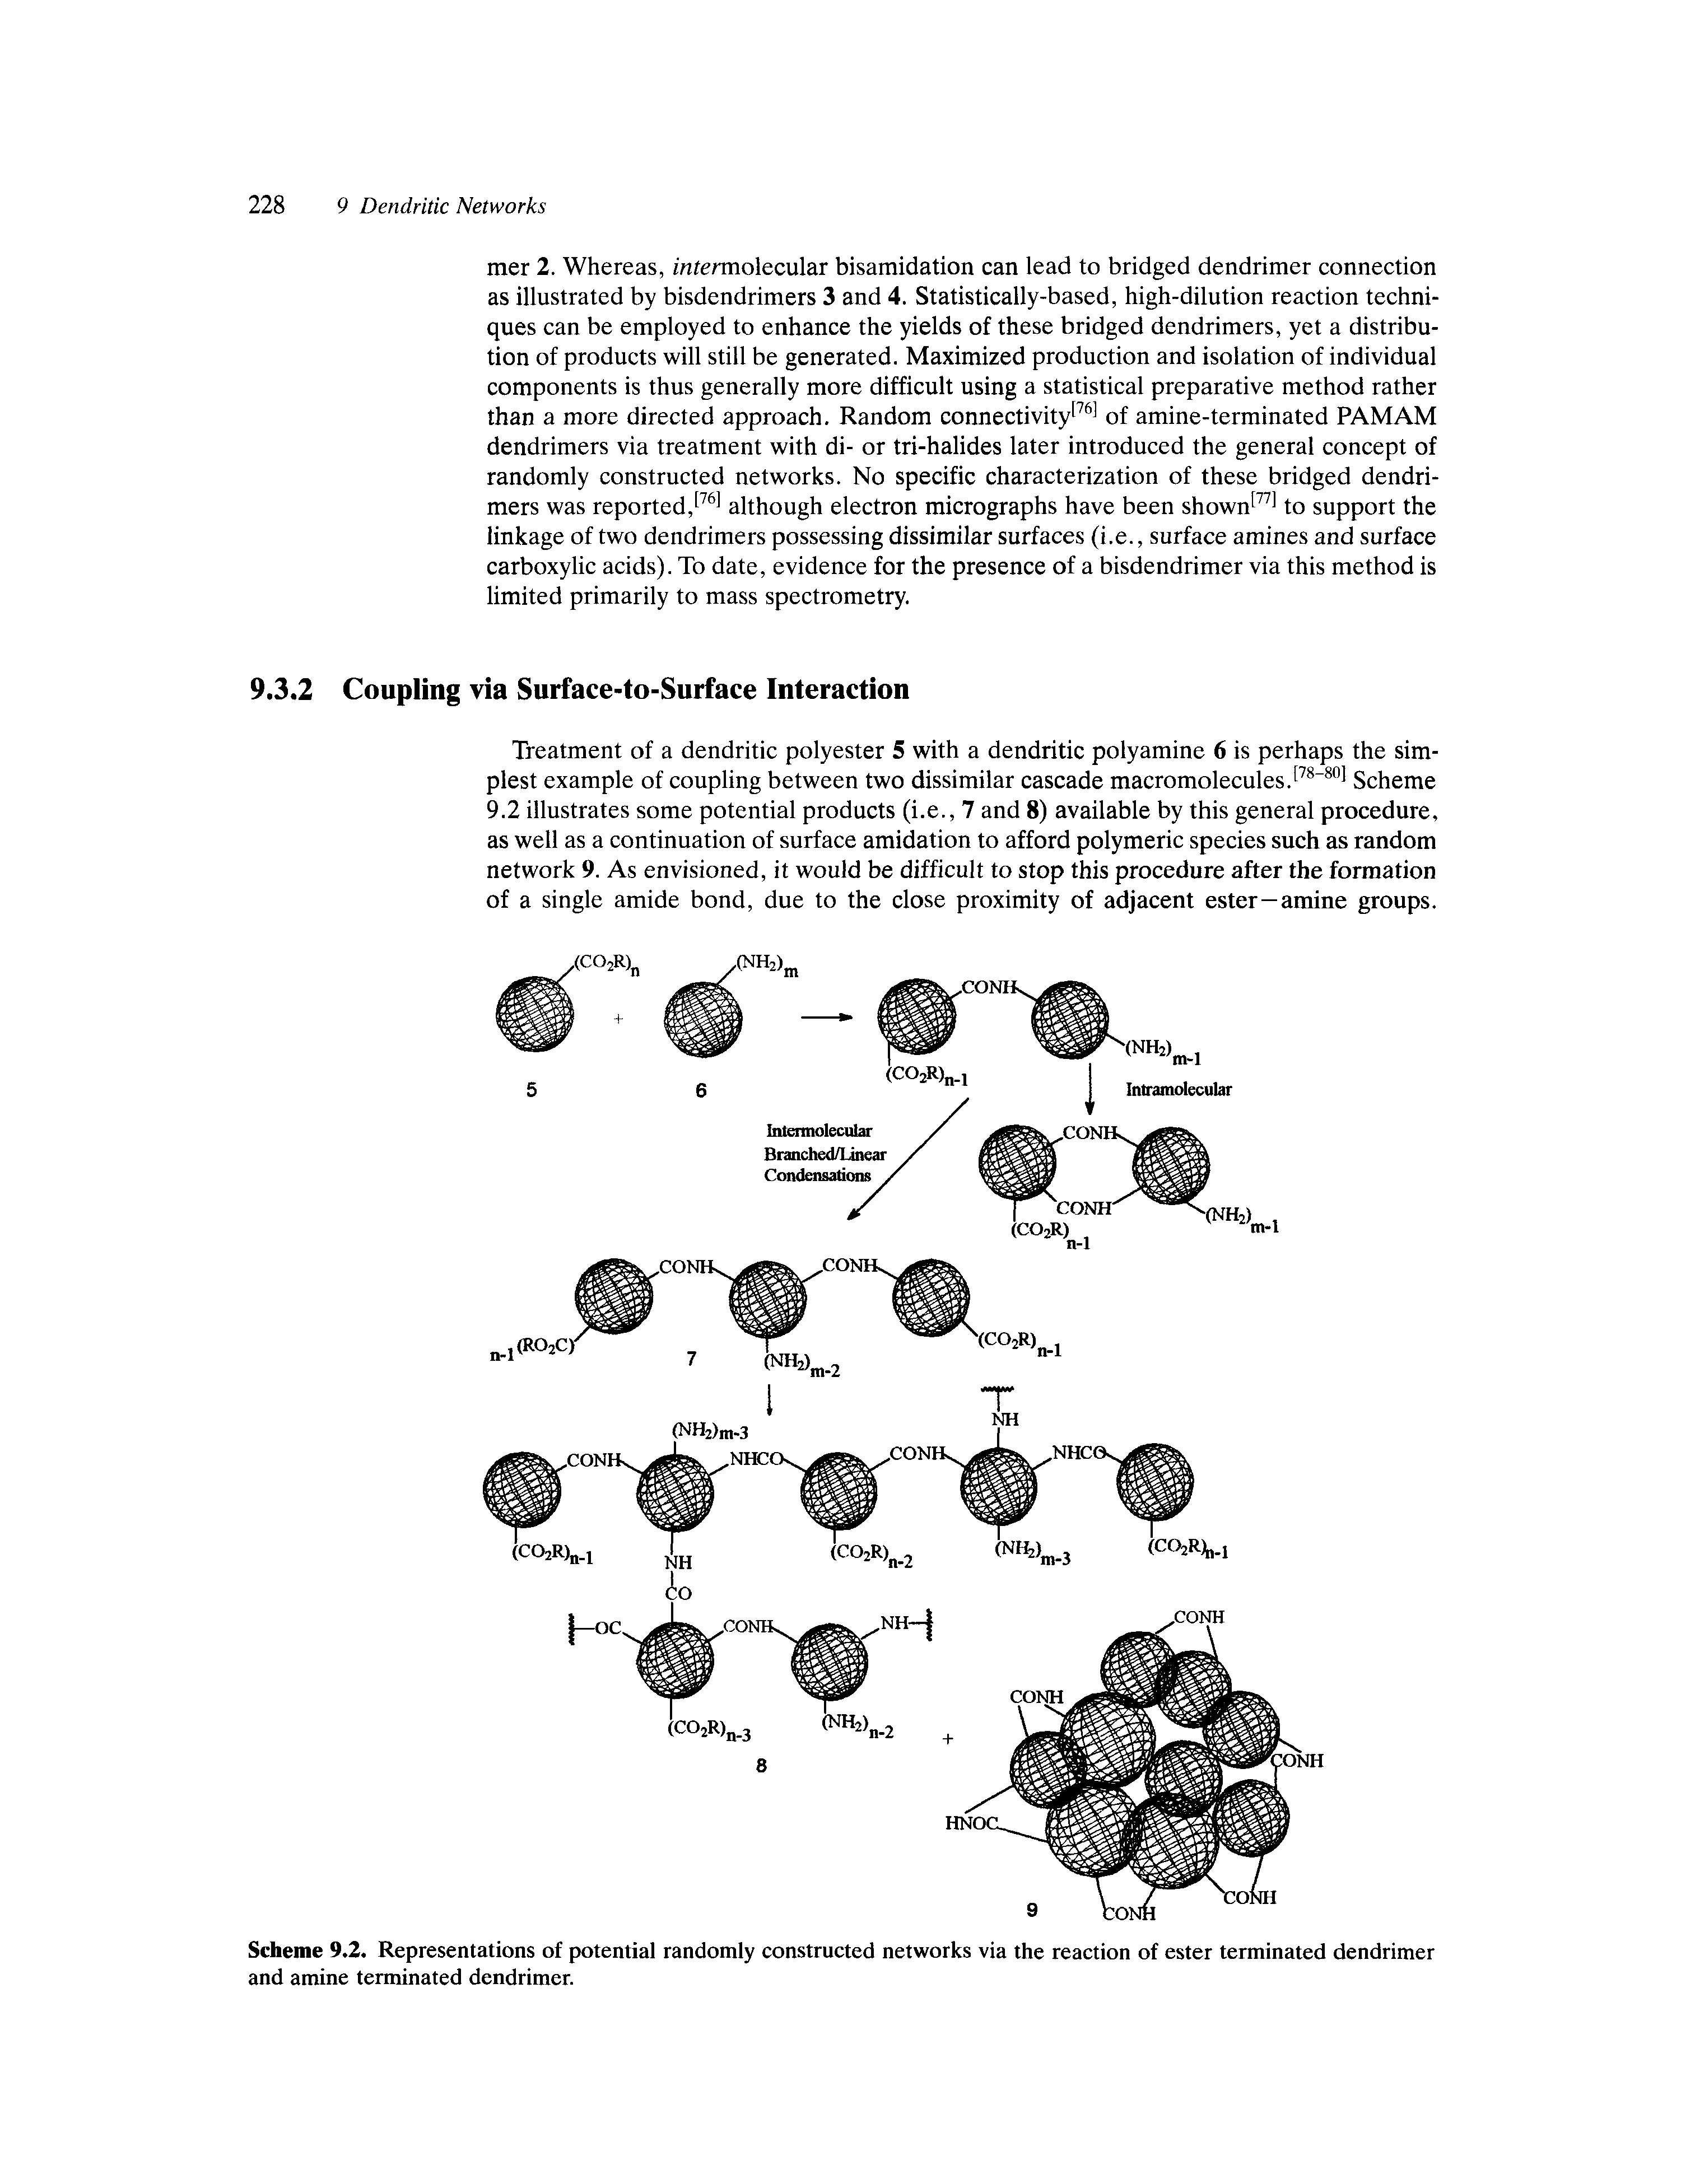 Scheme 9.2. Representations of potential randomly constructed networks via the reaction of ester terminated dendrimer and amine terminated dendrimer.